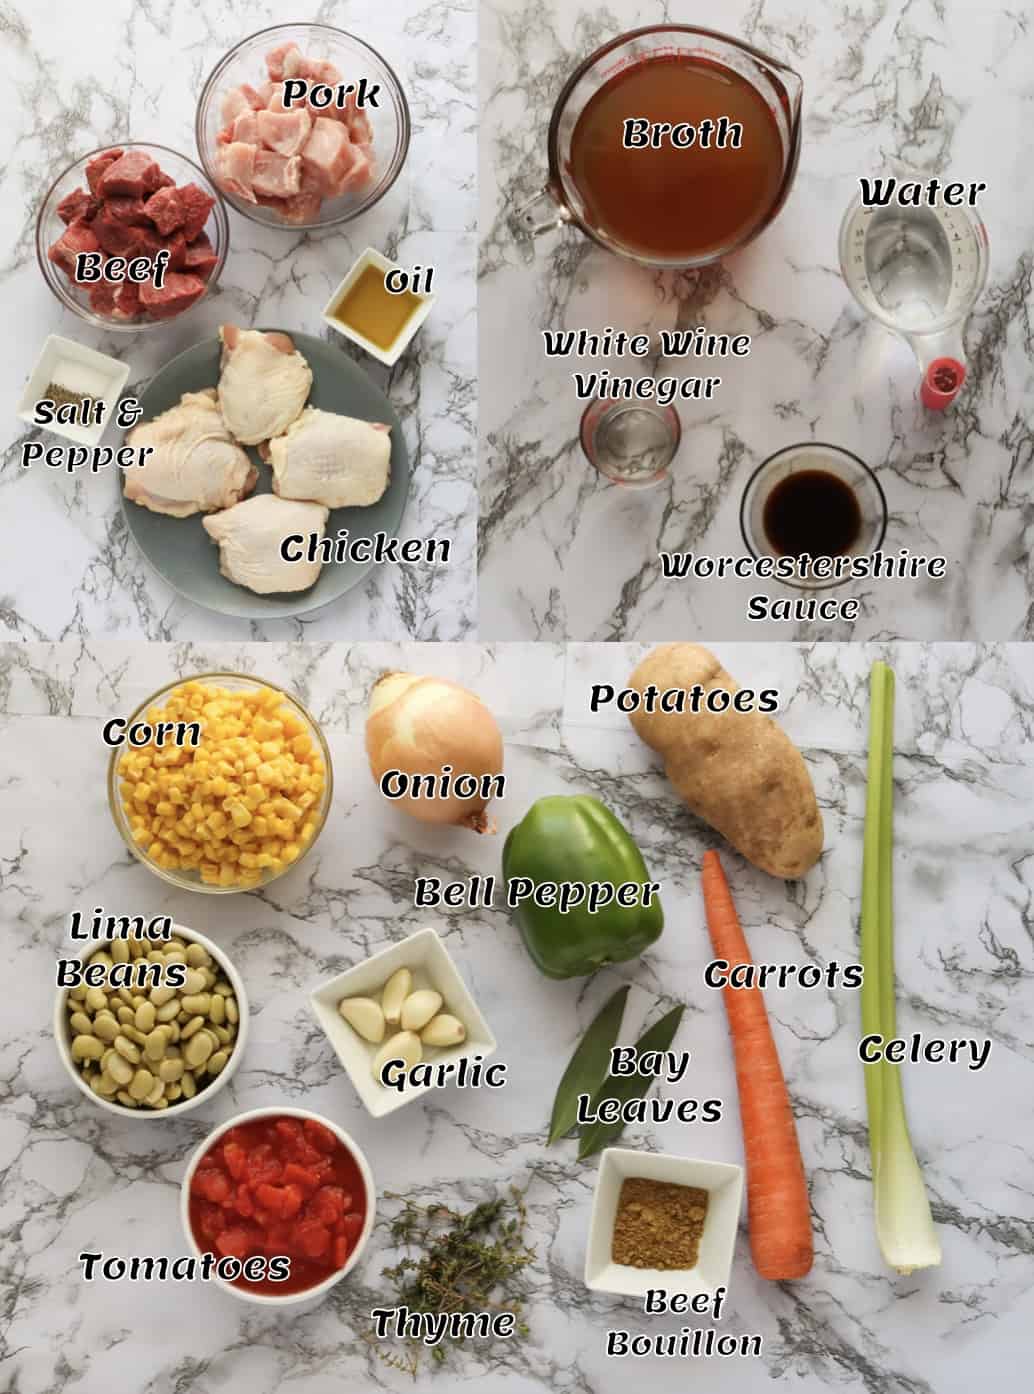 What you need to make delicious burgoo